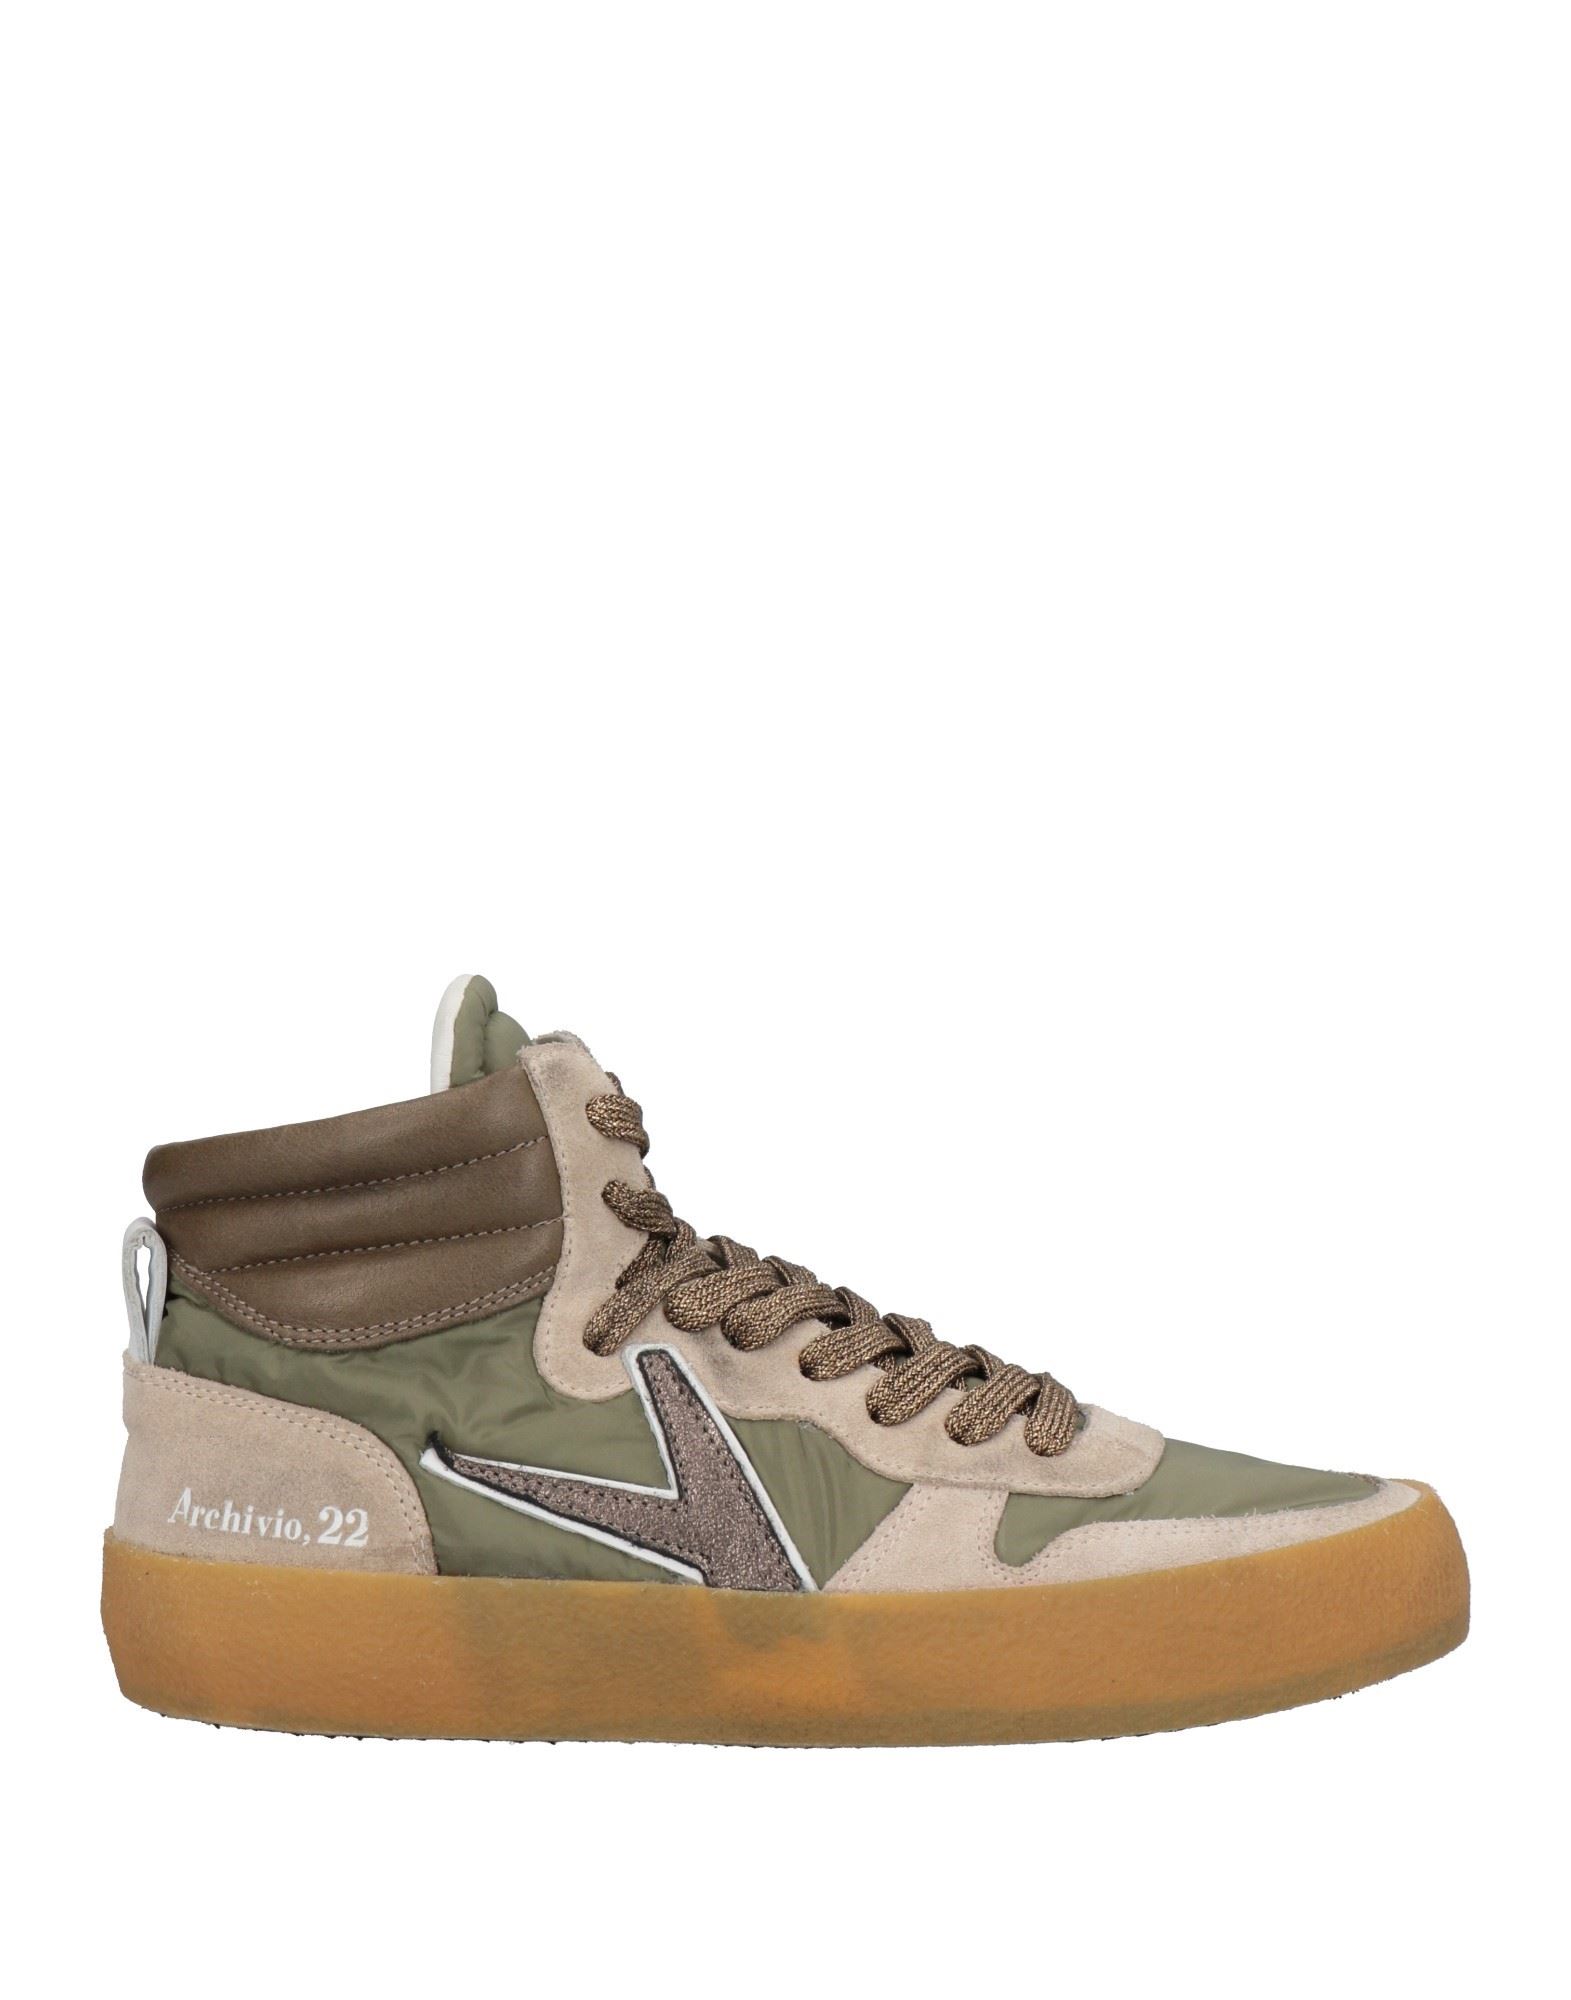 Archivio,22 Sneakers In Military Green